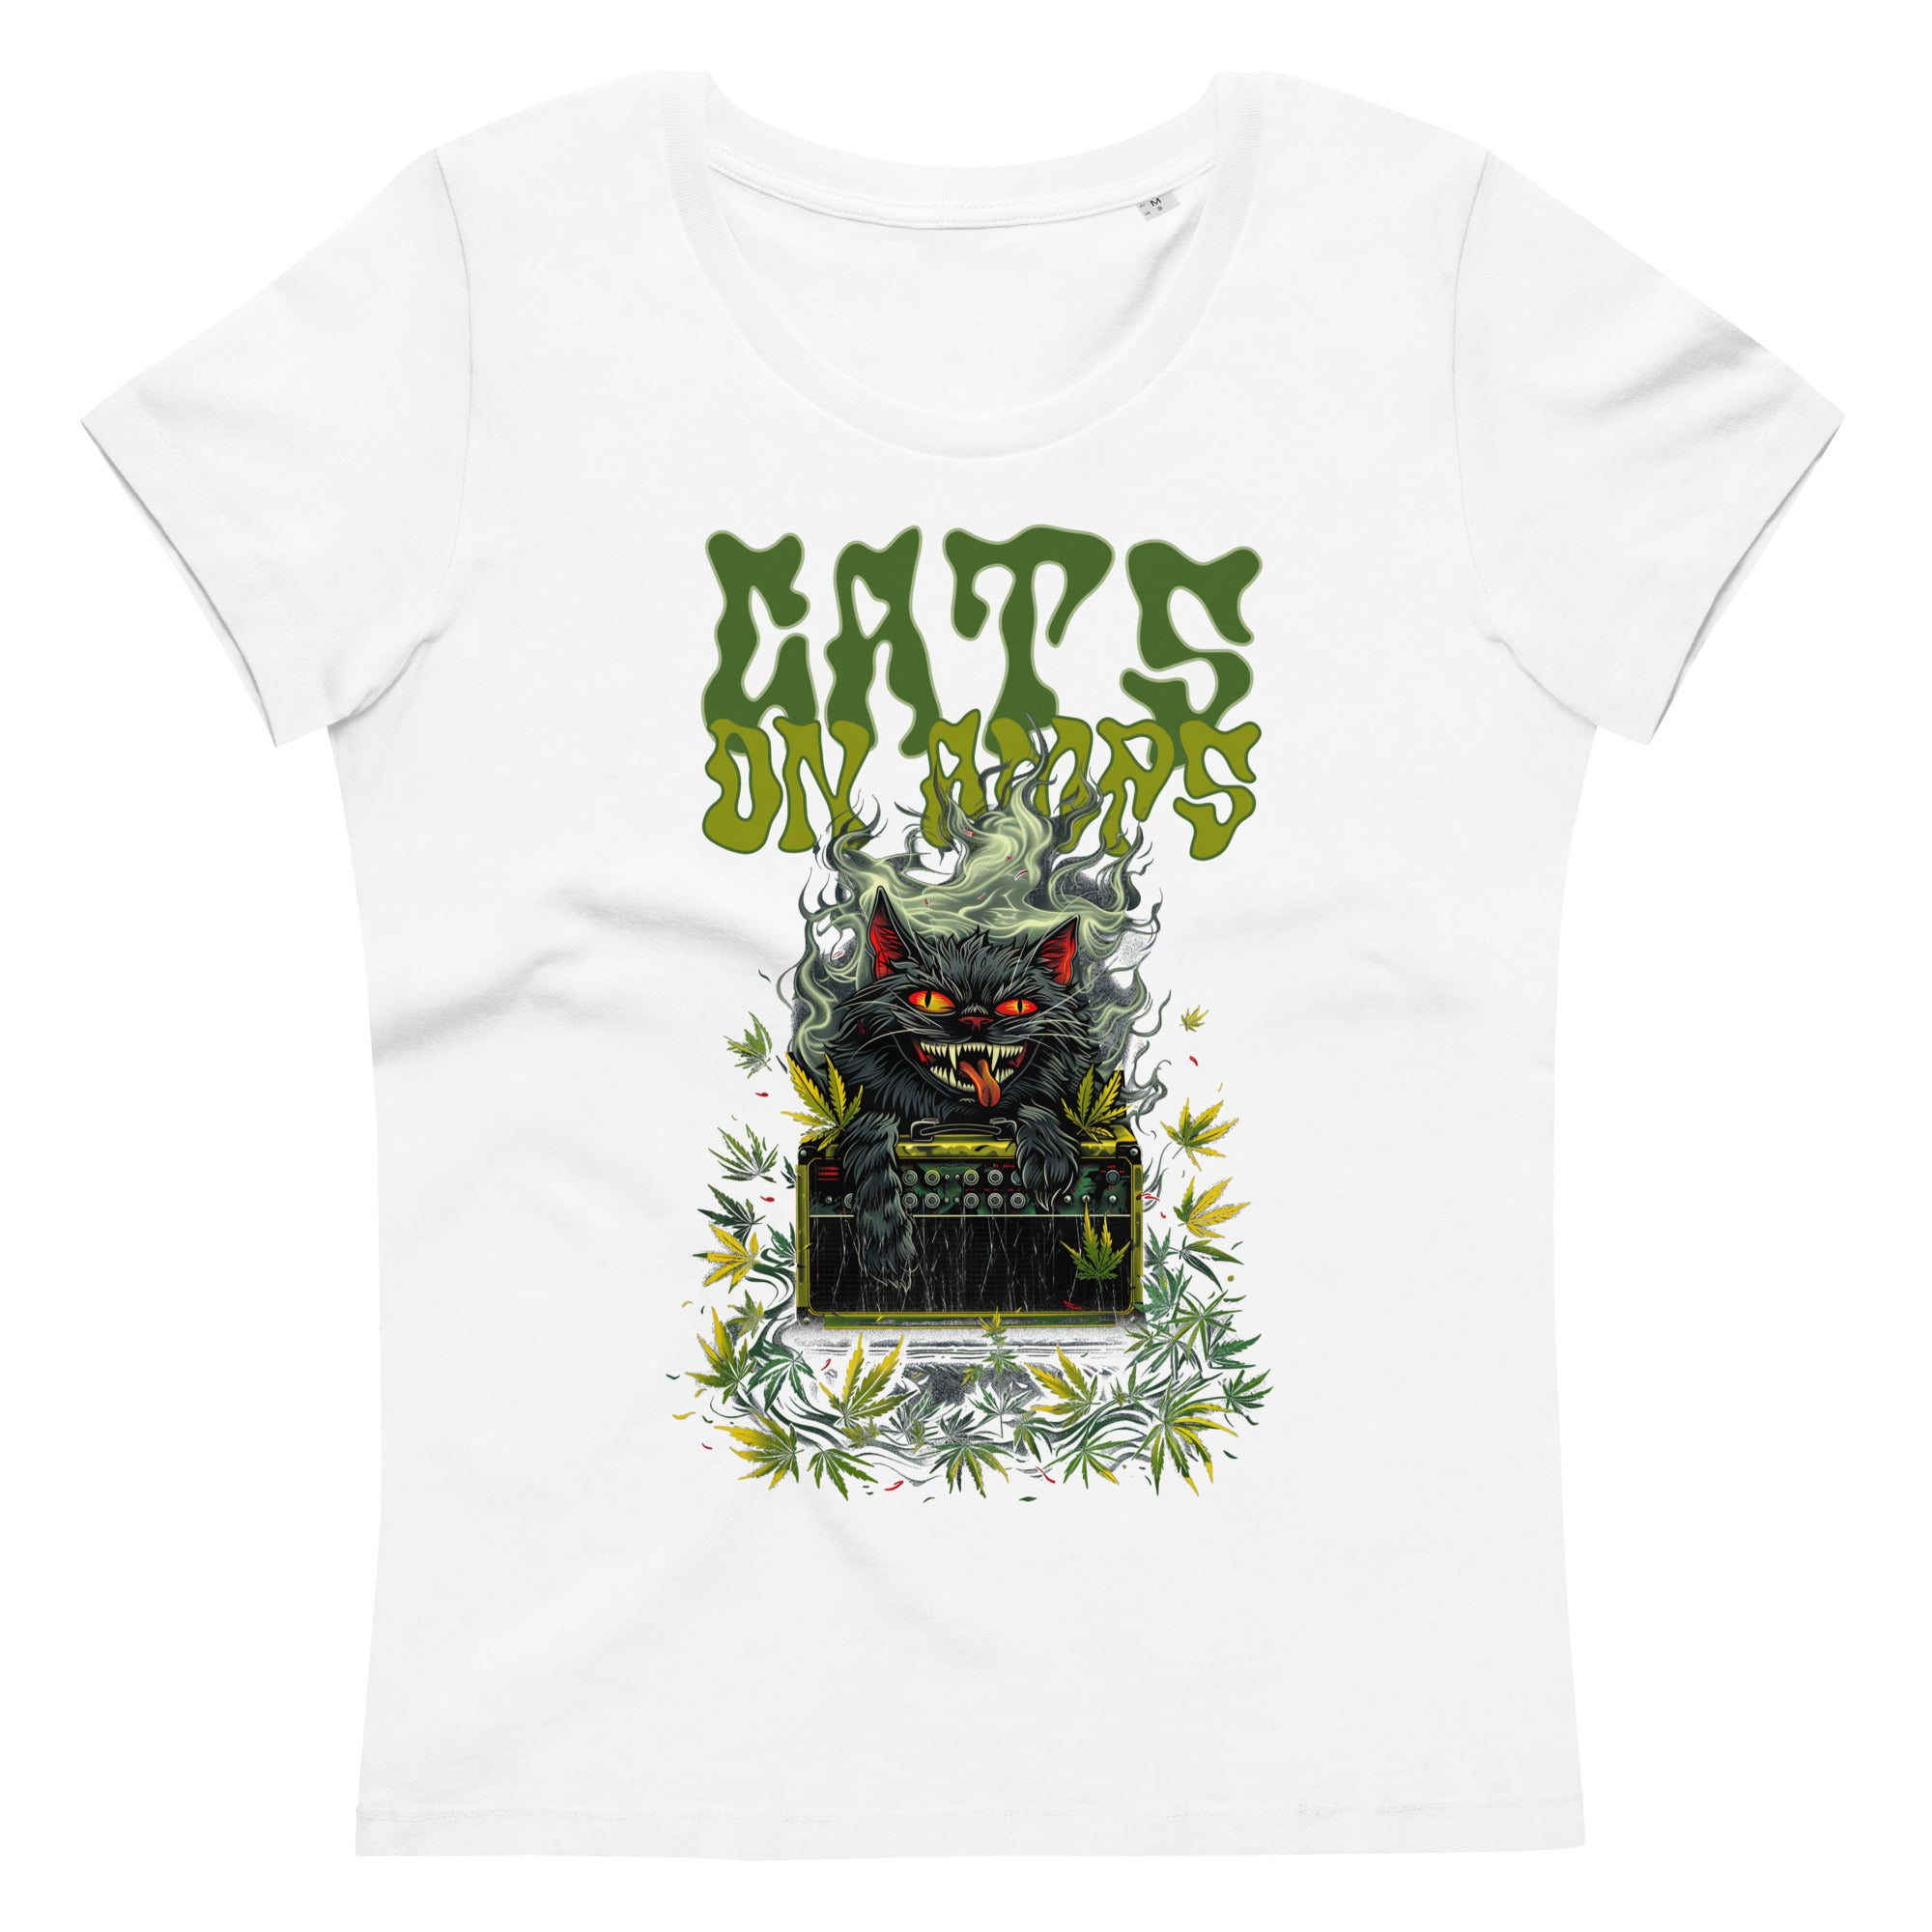 CATS ON AMPS - 420 Red Eye - Women's fitted eco tee